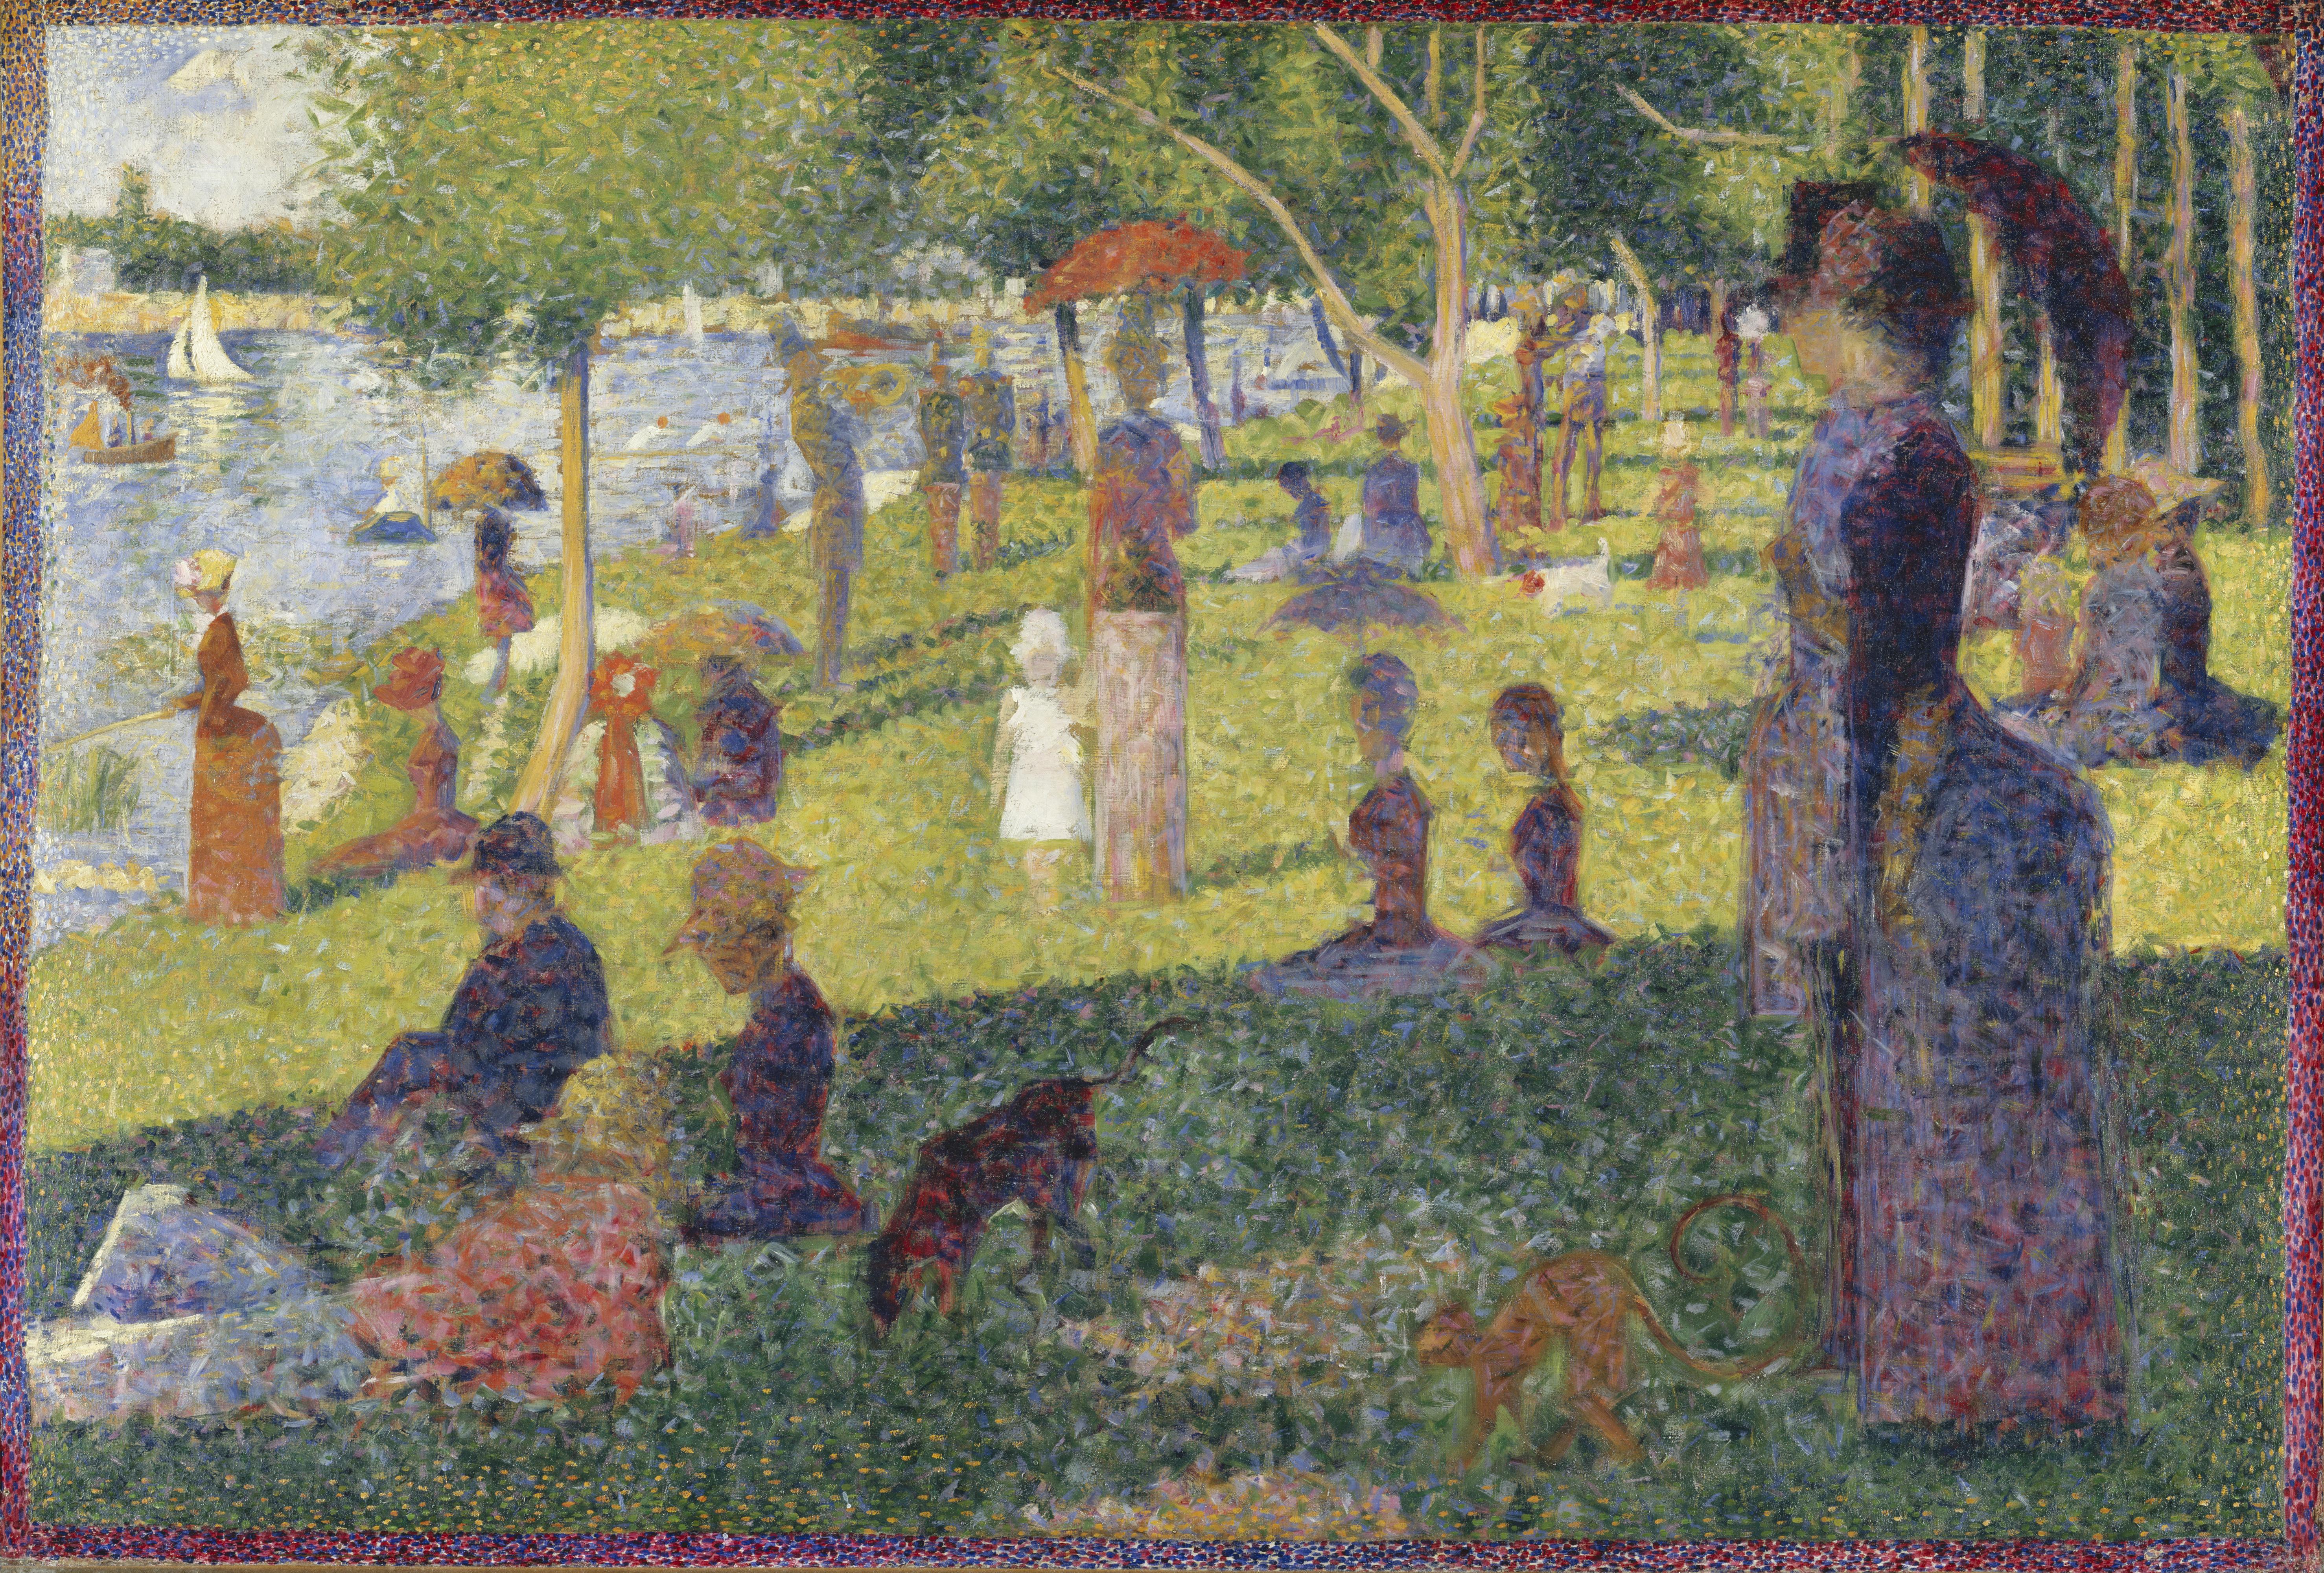 Study for A Sunday on La Grande Jatte by Georges Seurat - 1884 - 70.5 x 104.1 cm private collection